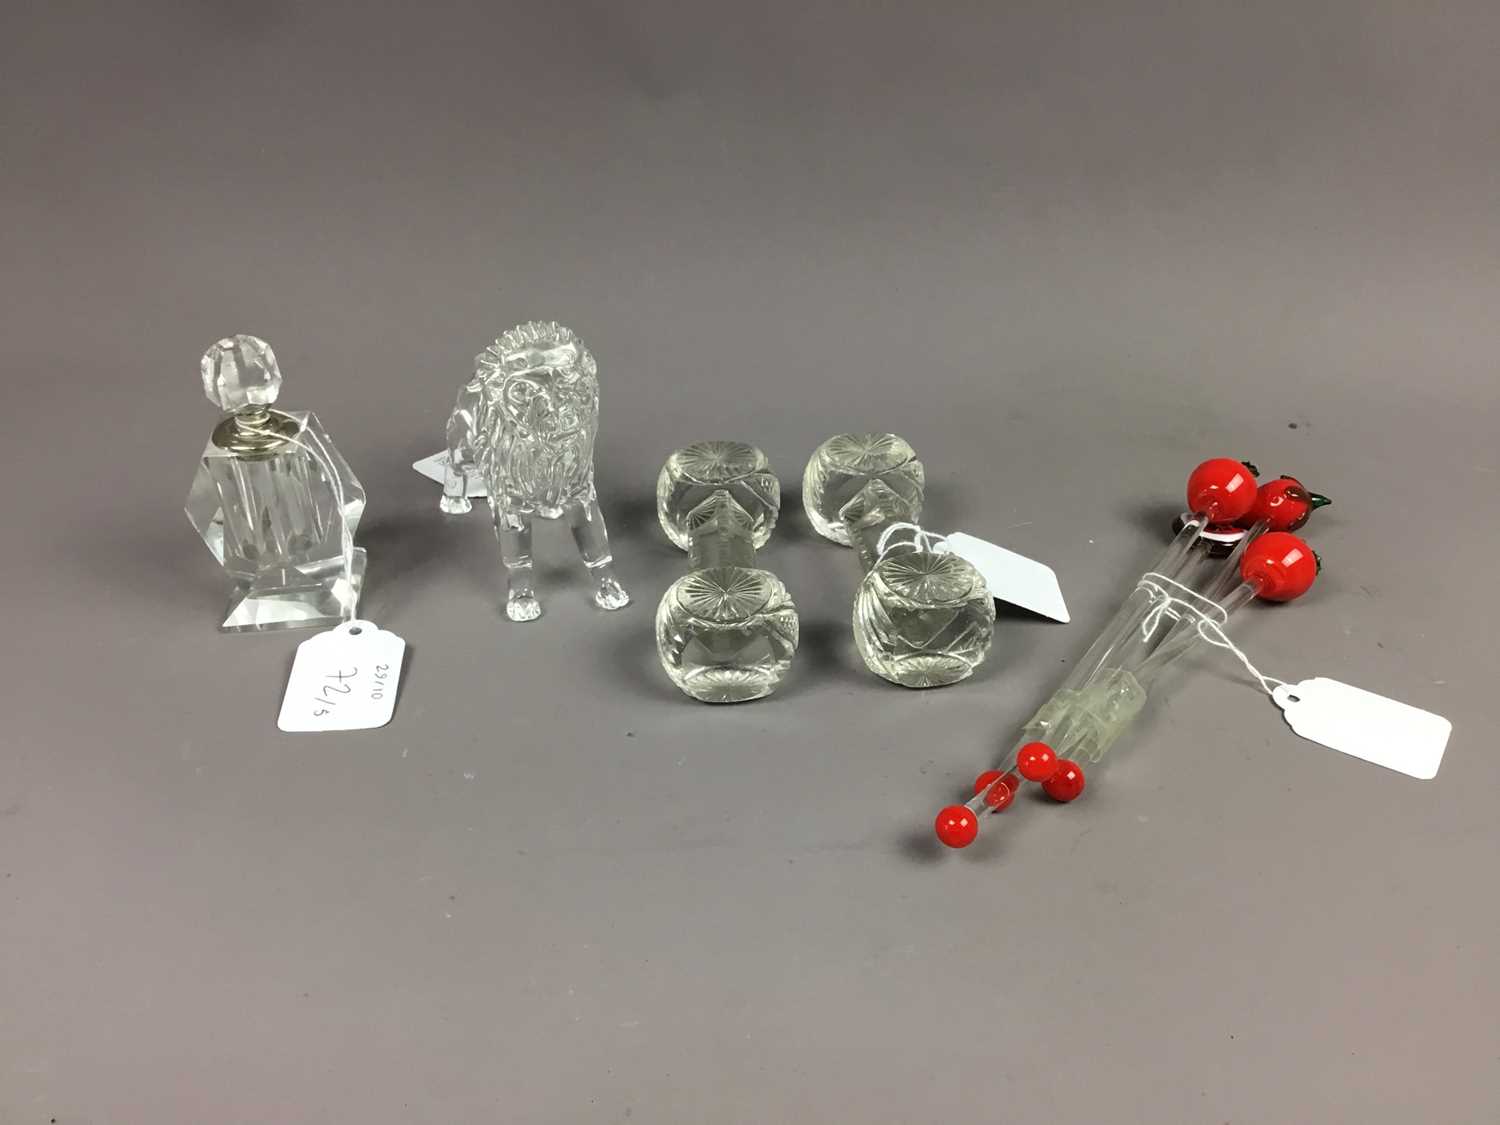 Lot 72 - A GLASS LION FIGURE, ALONG WITH GLASS COCKTAIL STIRRERS AND OTHER ITEMS